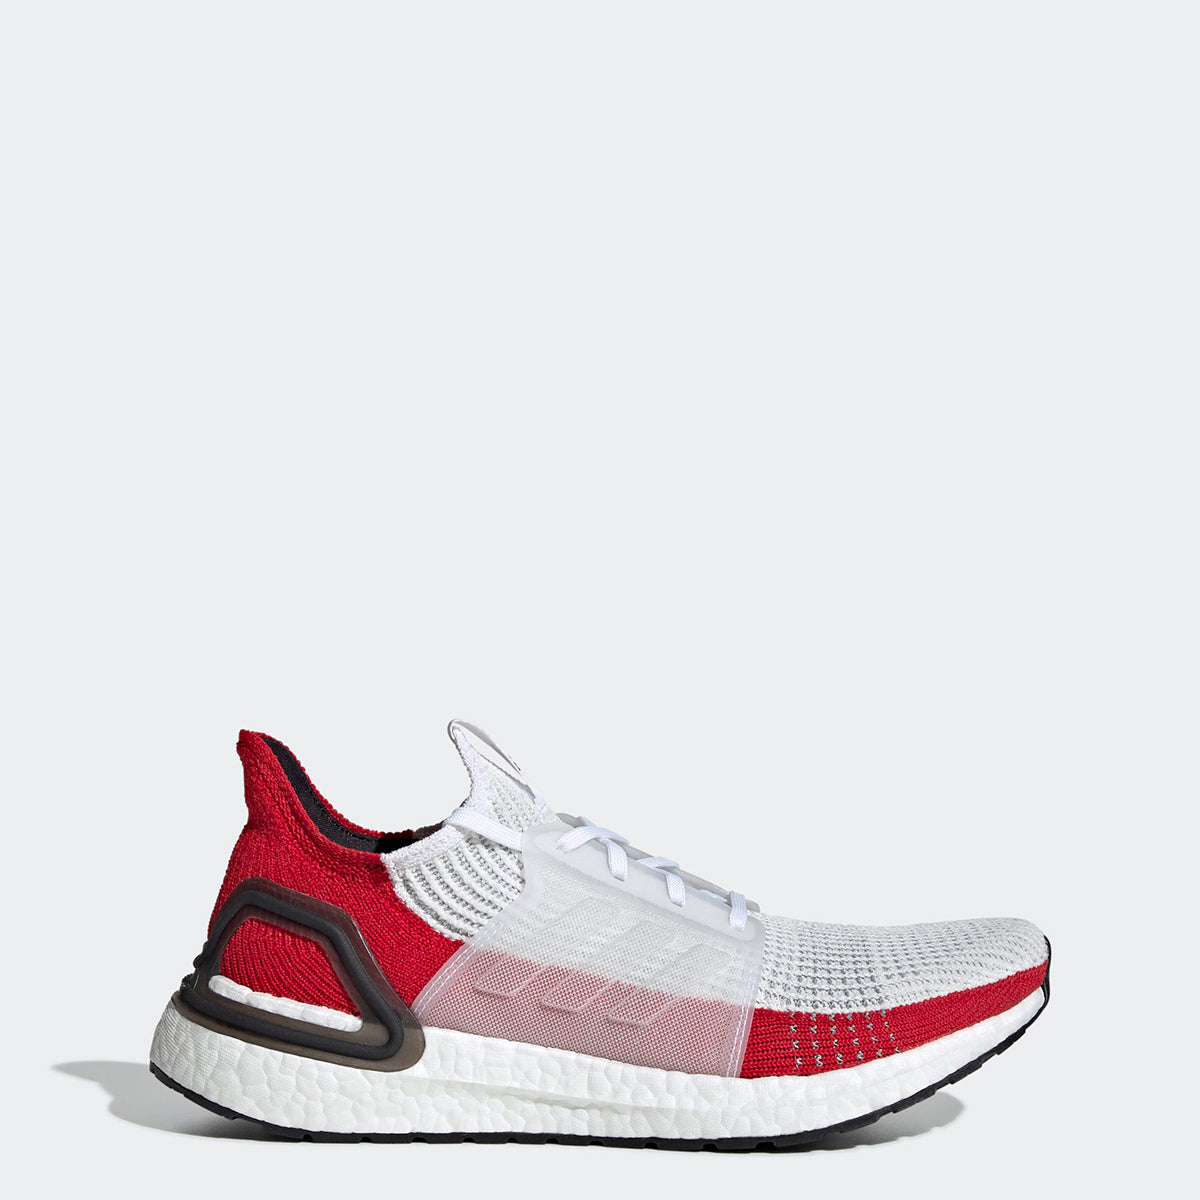 adidas Ultraboost 19 Shoes Red EF1341 